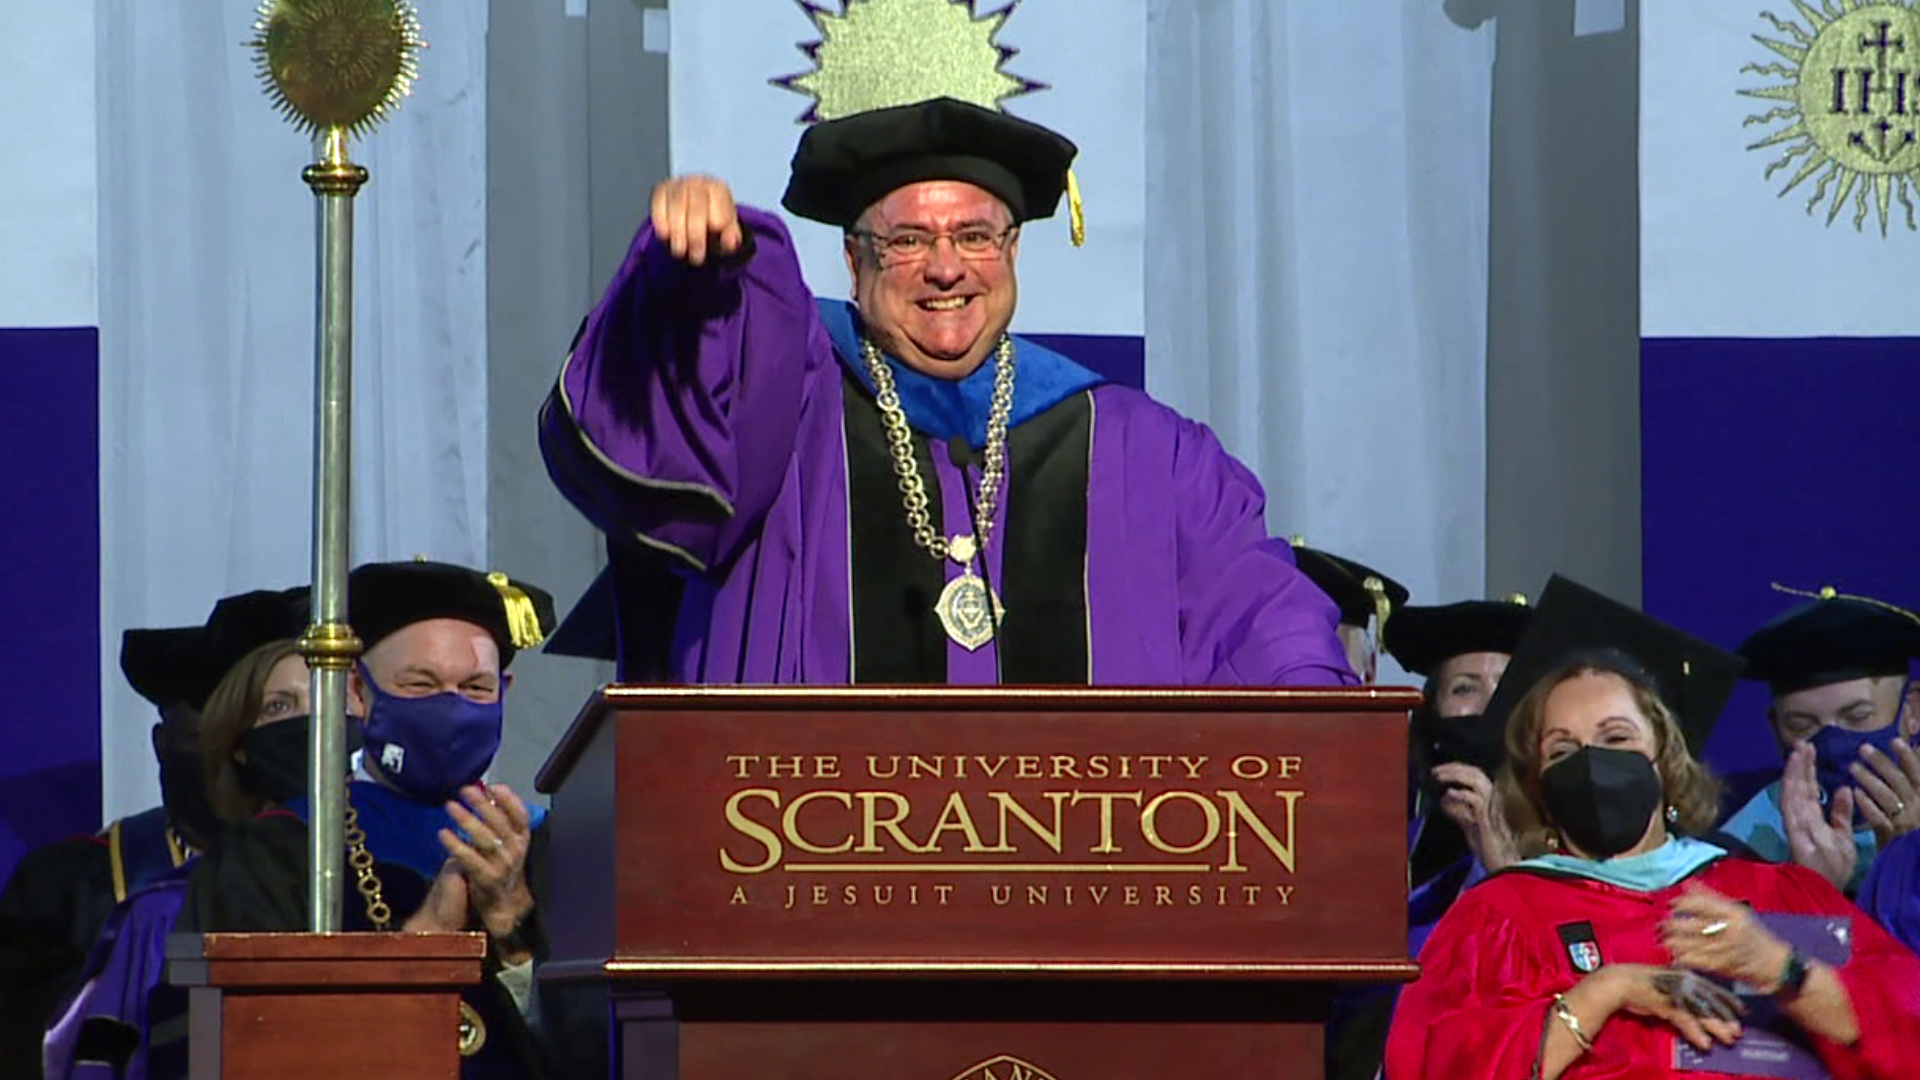 It's the beginning of a new era at the University of Scranton. Newswatch 16's Elizabeth Worthington introduces us to Father Marina, the school's new president.